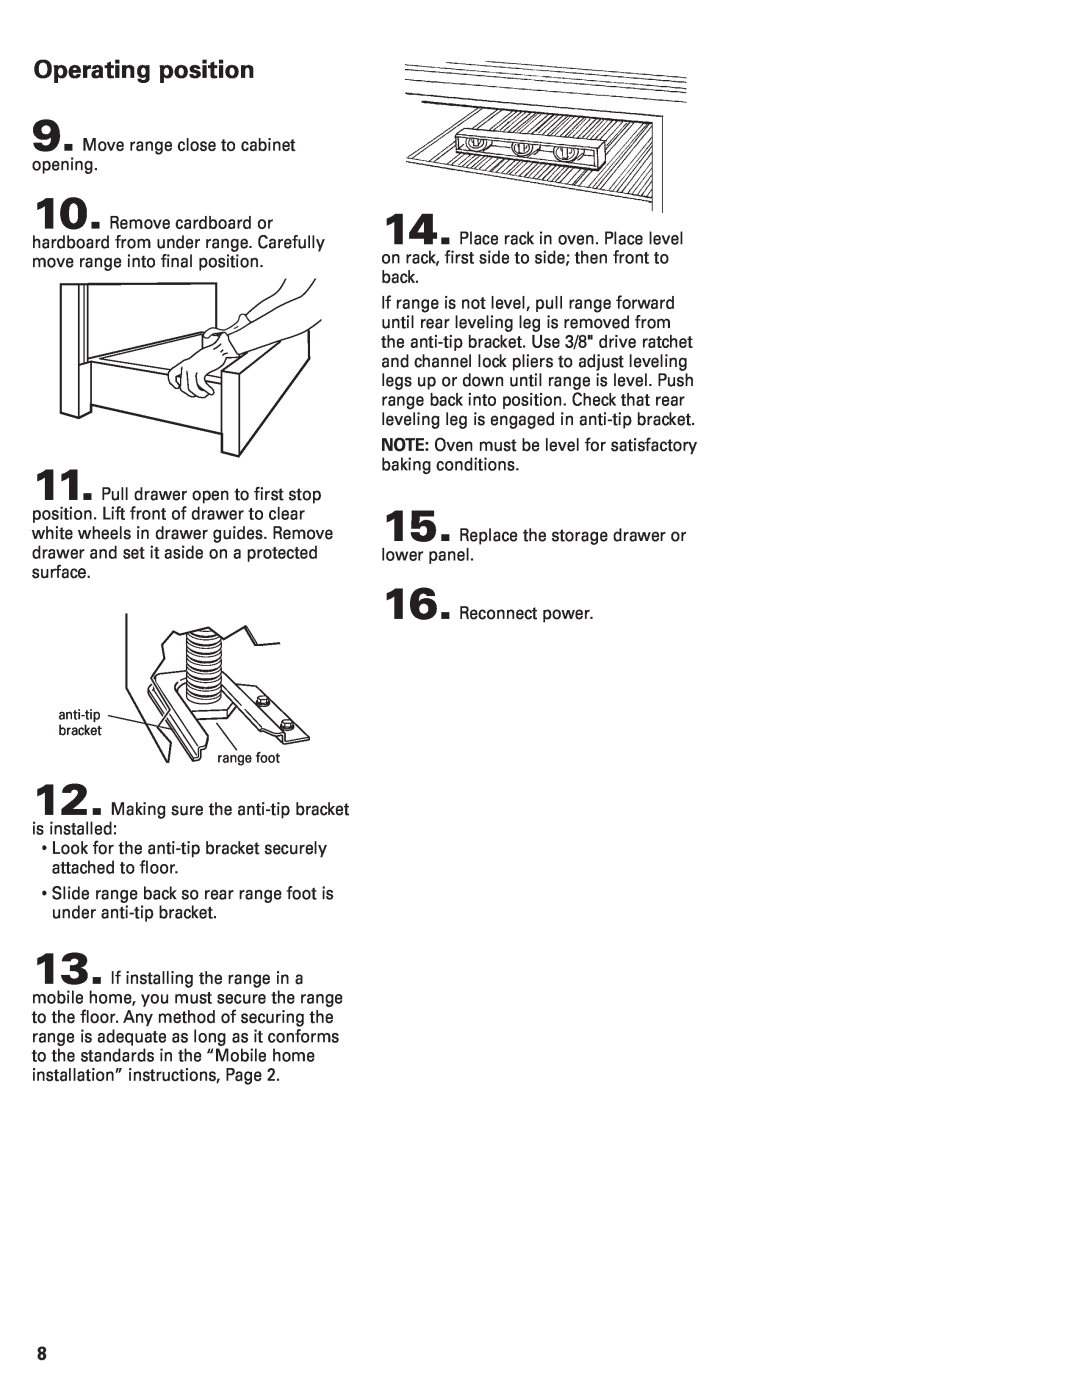 KitchenAid Convection Oven installation instructions Operating position 